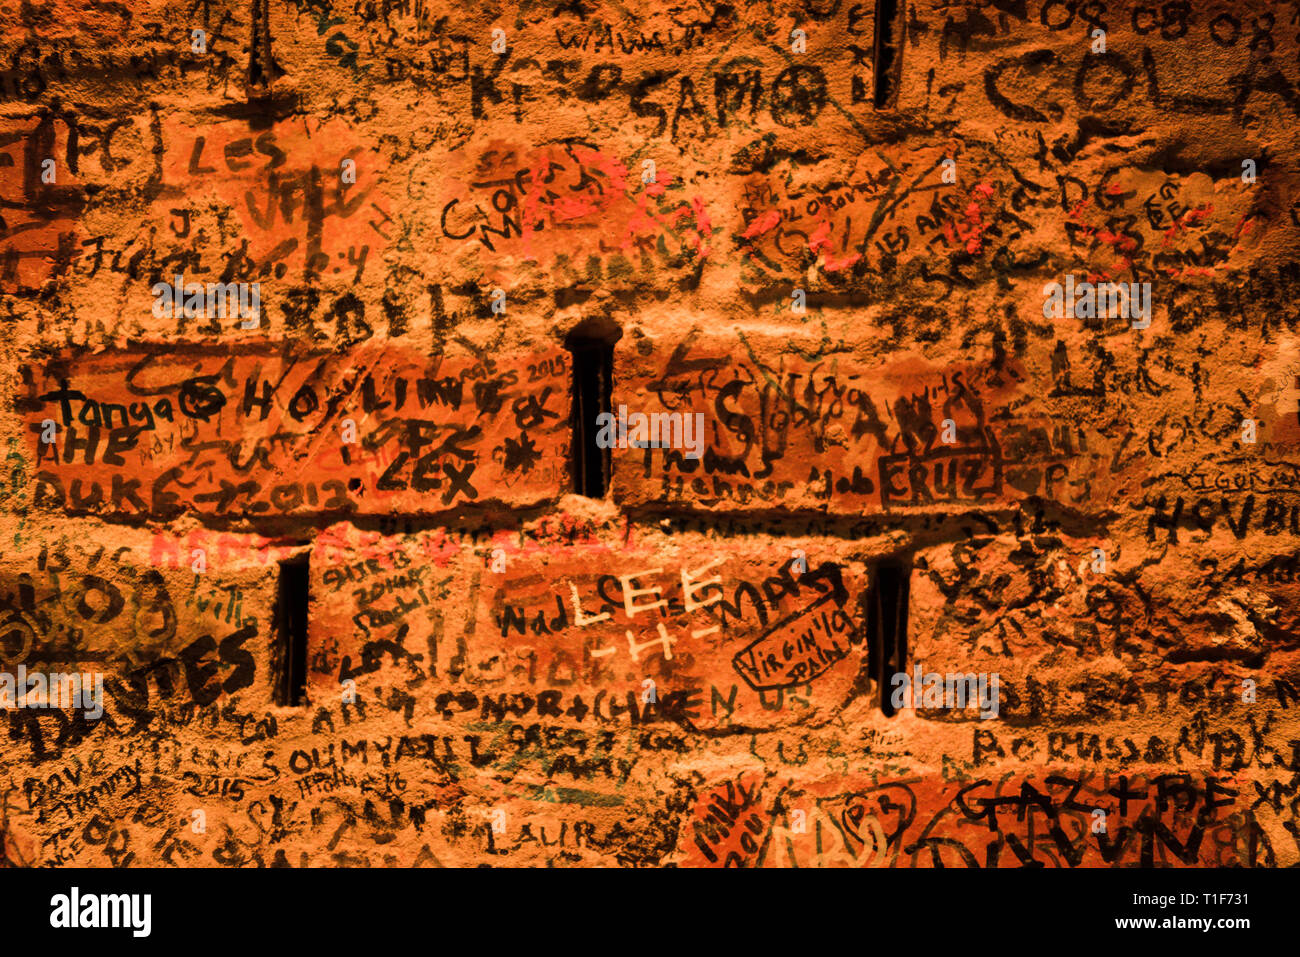 graffiti wall in the cavern nightclub, liverpool, home of the beatles Stock Photo